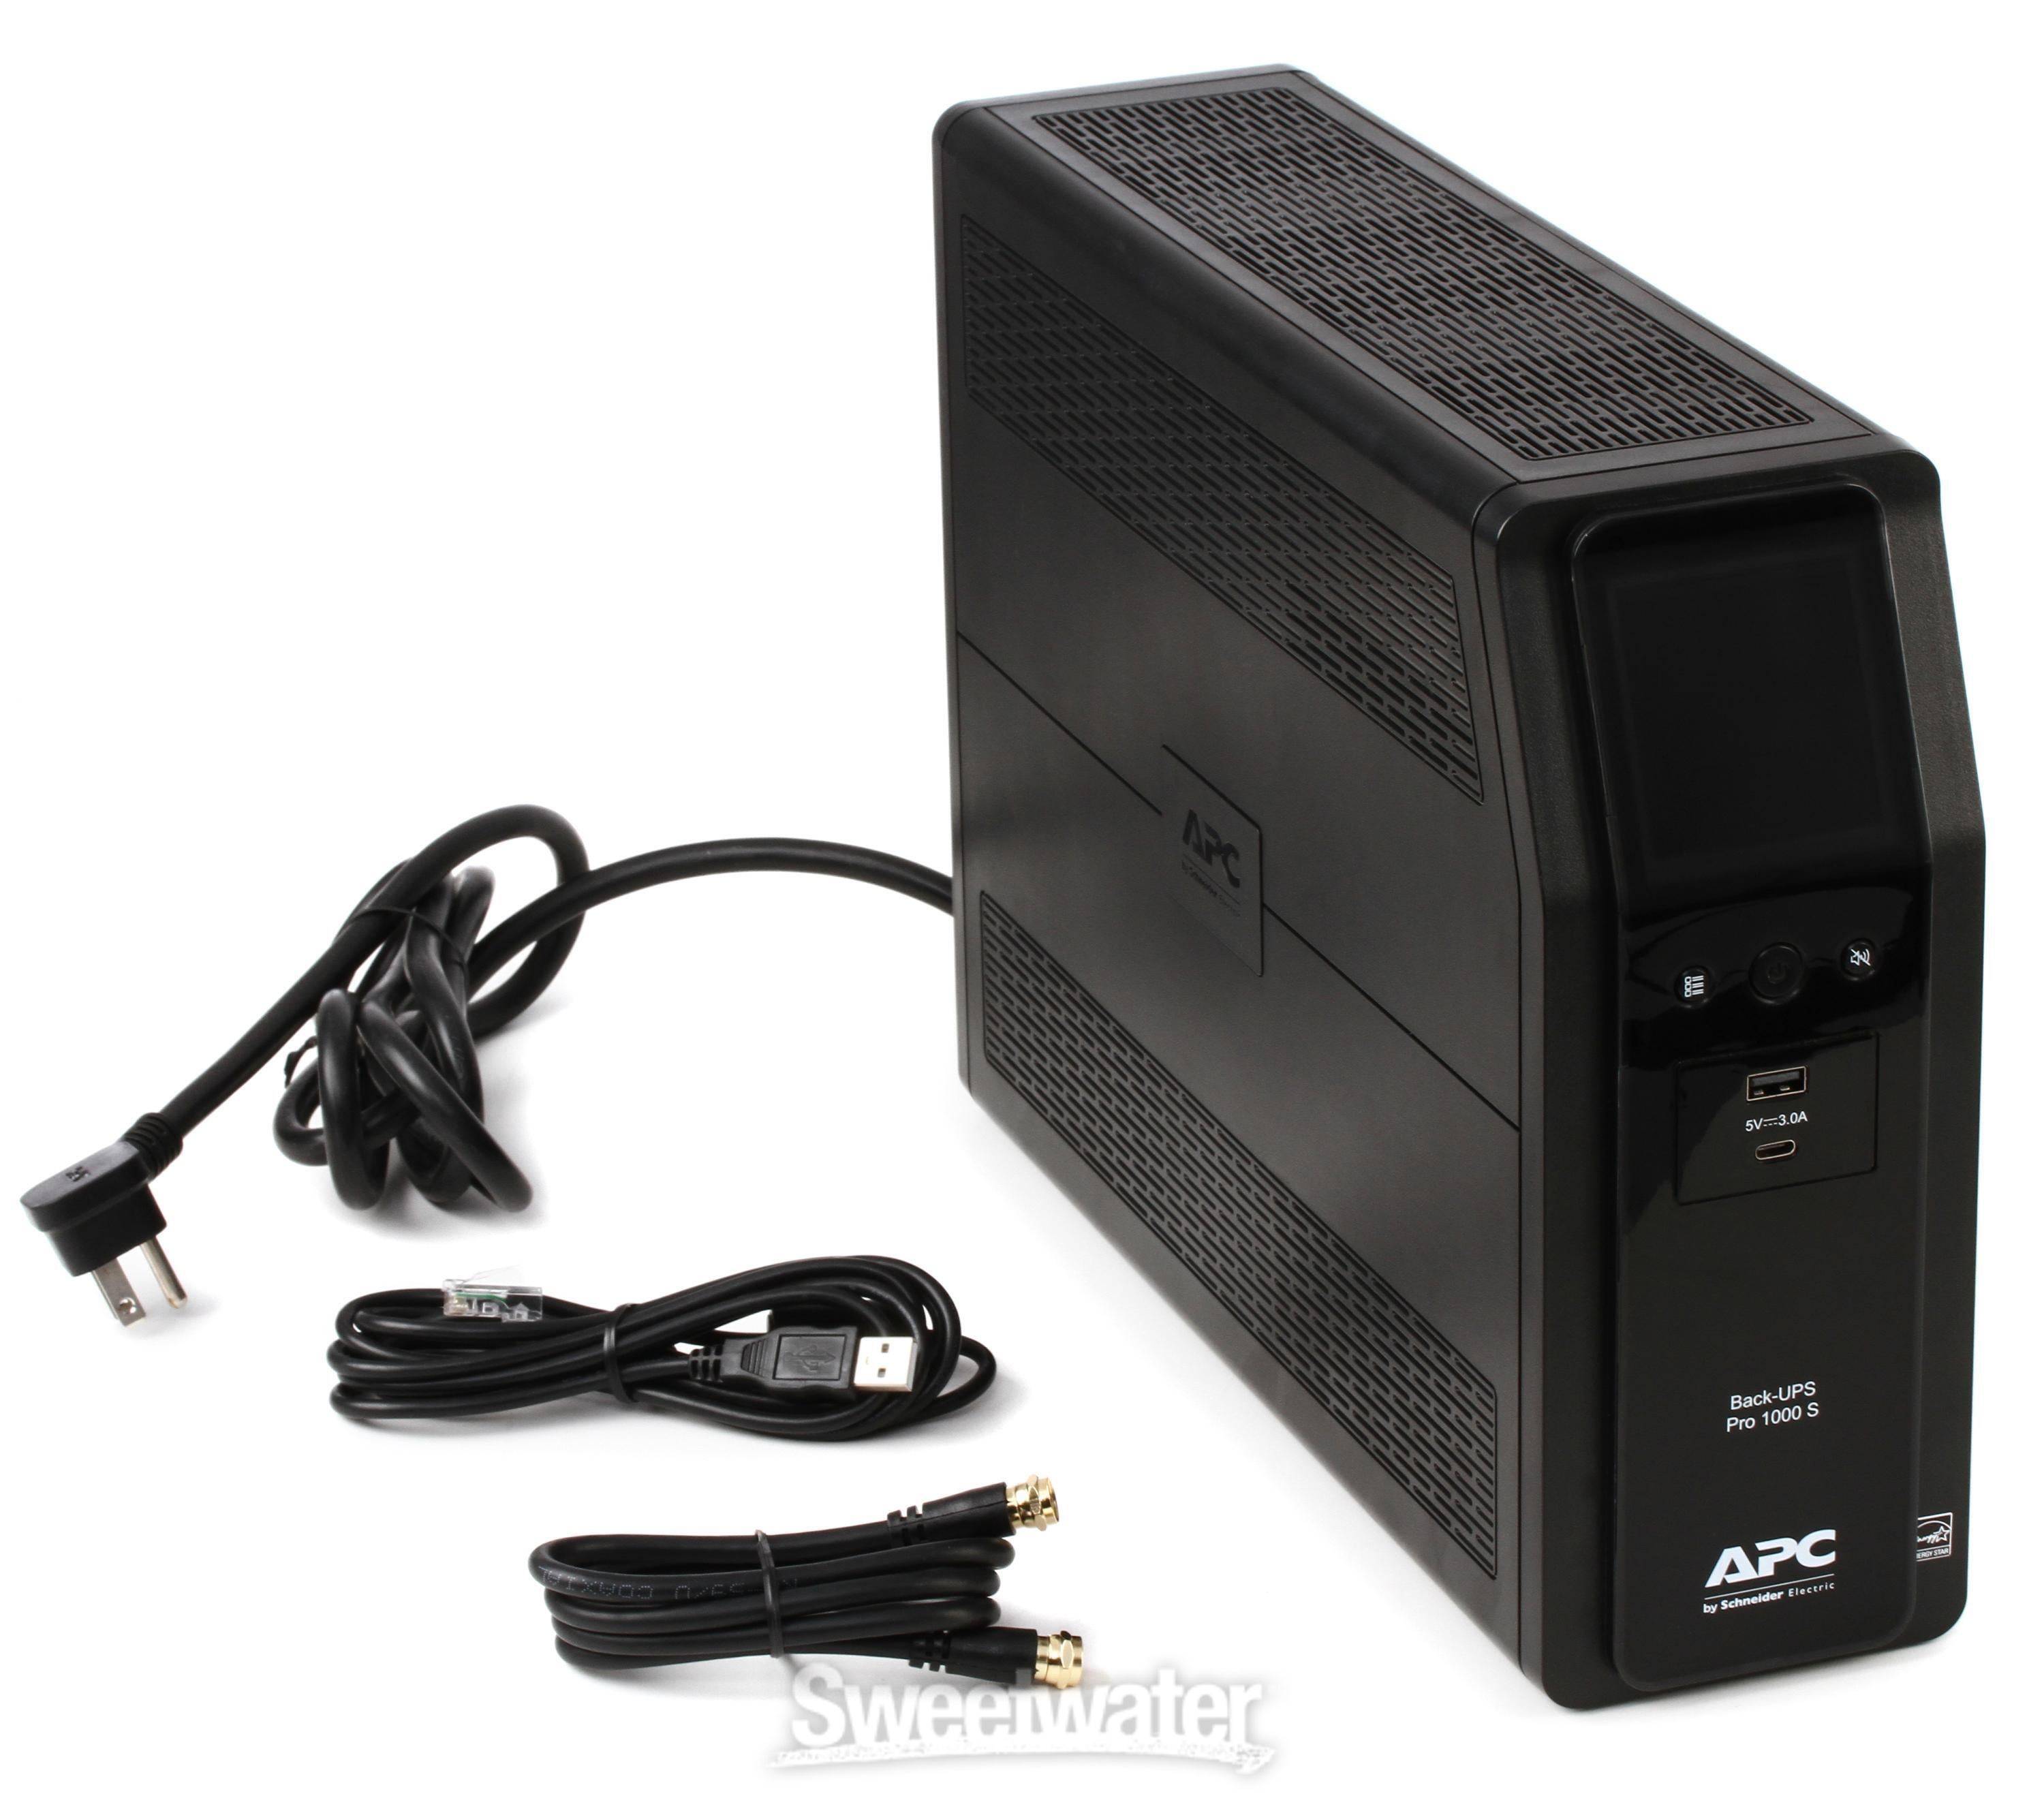 APC BR1000MS Back UPS PRO BR 1000VA, SineWave, 10 Outlets, USB Charging  Ports, AVR, LCD interface Sweetwater